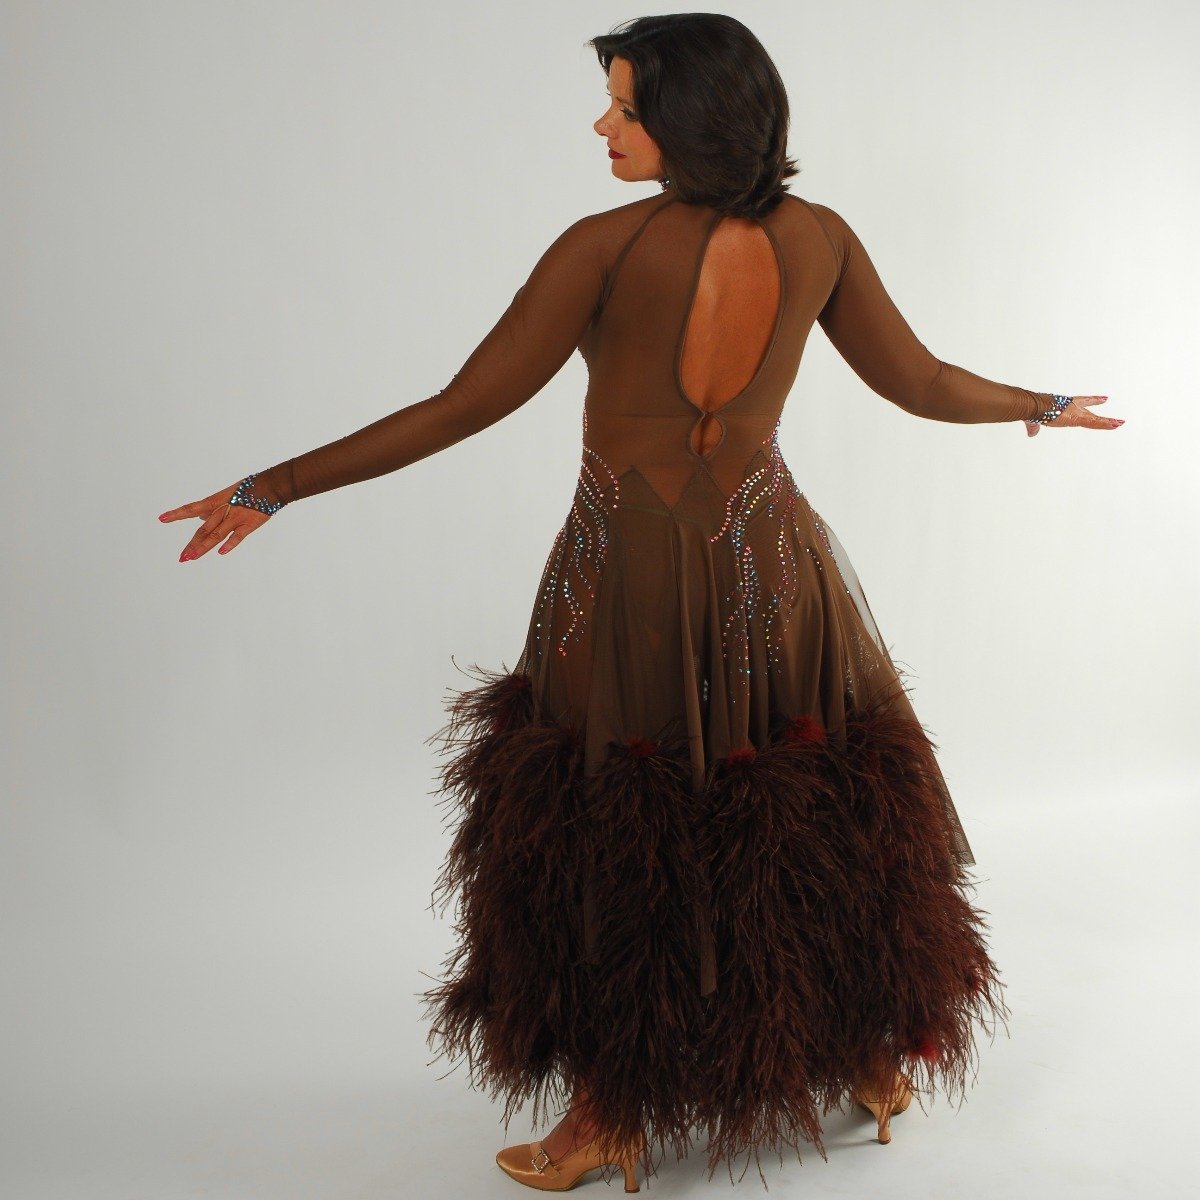 Crystal's Creations back view of brown ballroom dress created of brown sheer mesh illusion with detailed Swarovski rhinestone work in aqua Abs & brown ostrich feathers